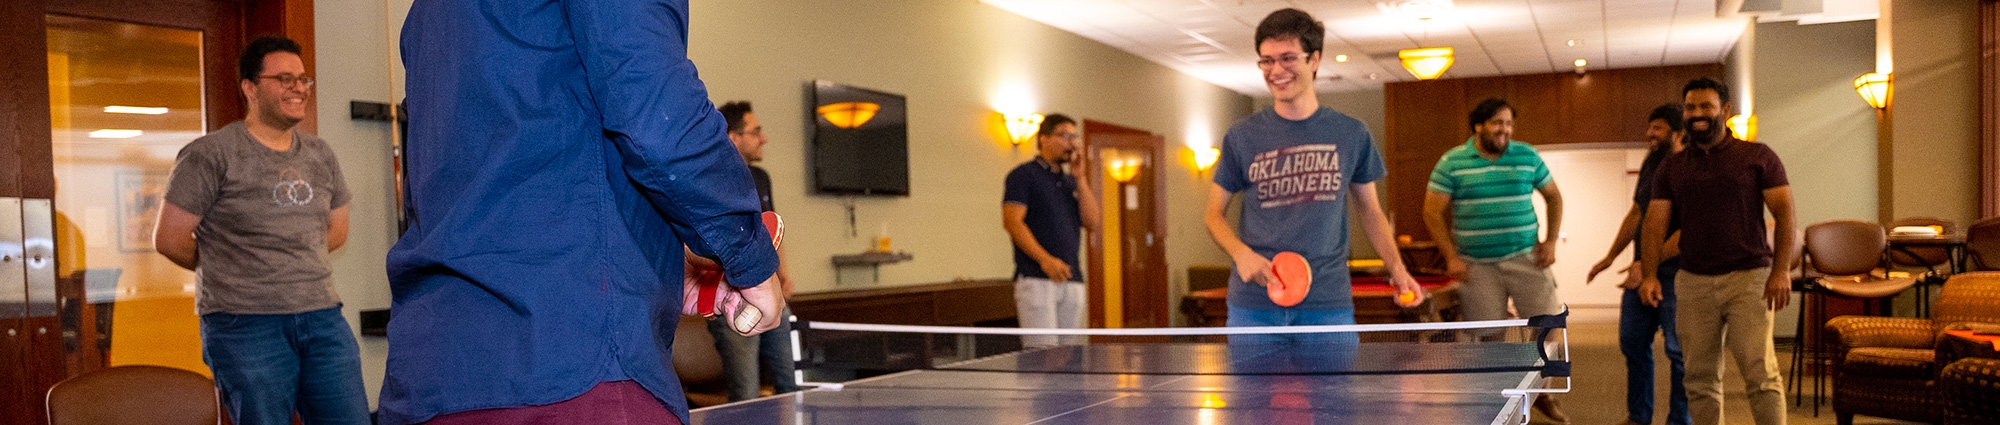 OU-Tulsa students play ping pong in Founders Student Center